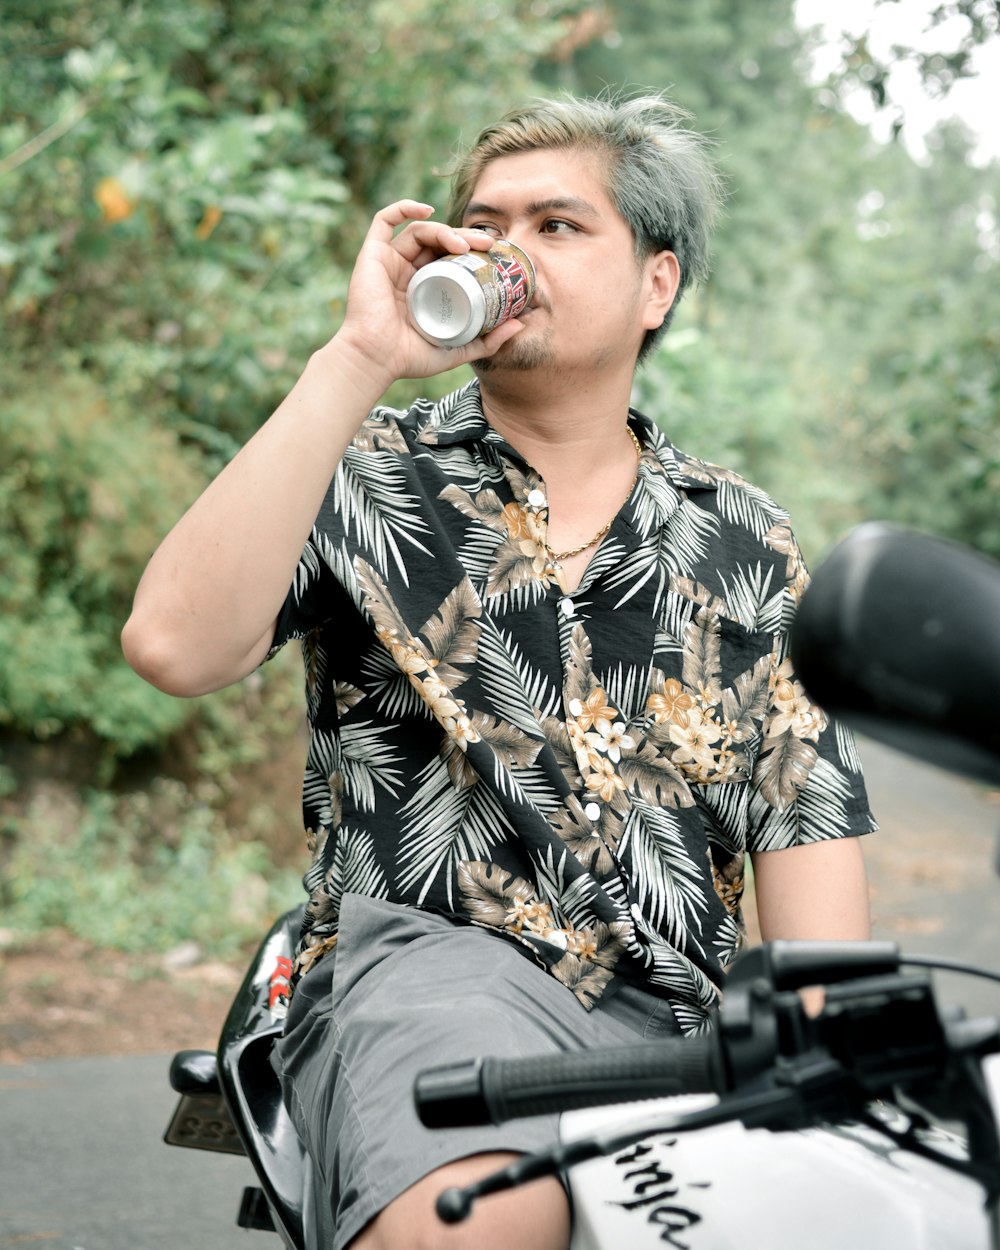 a man sitting on a motorcycle drinking from a can